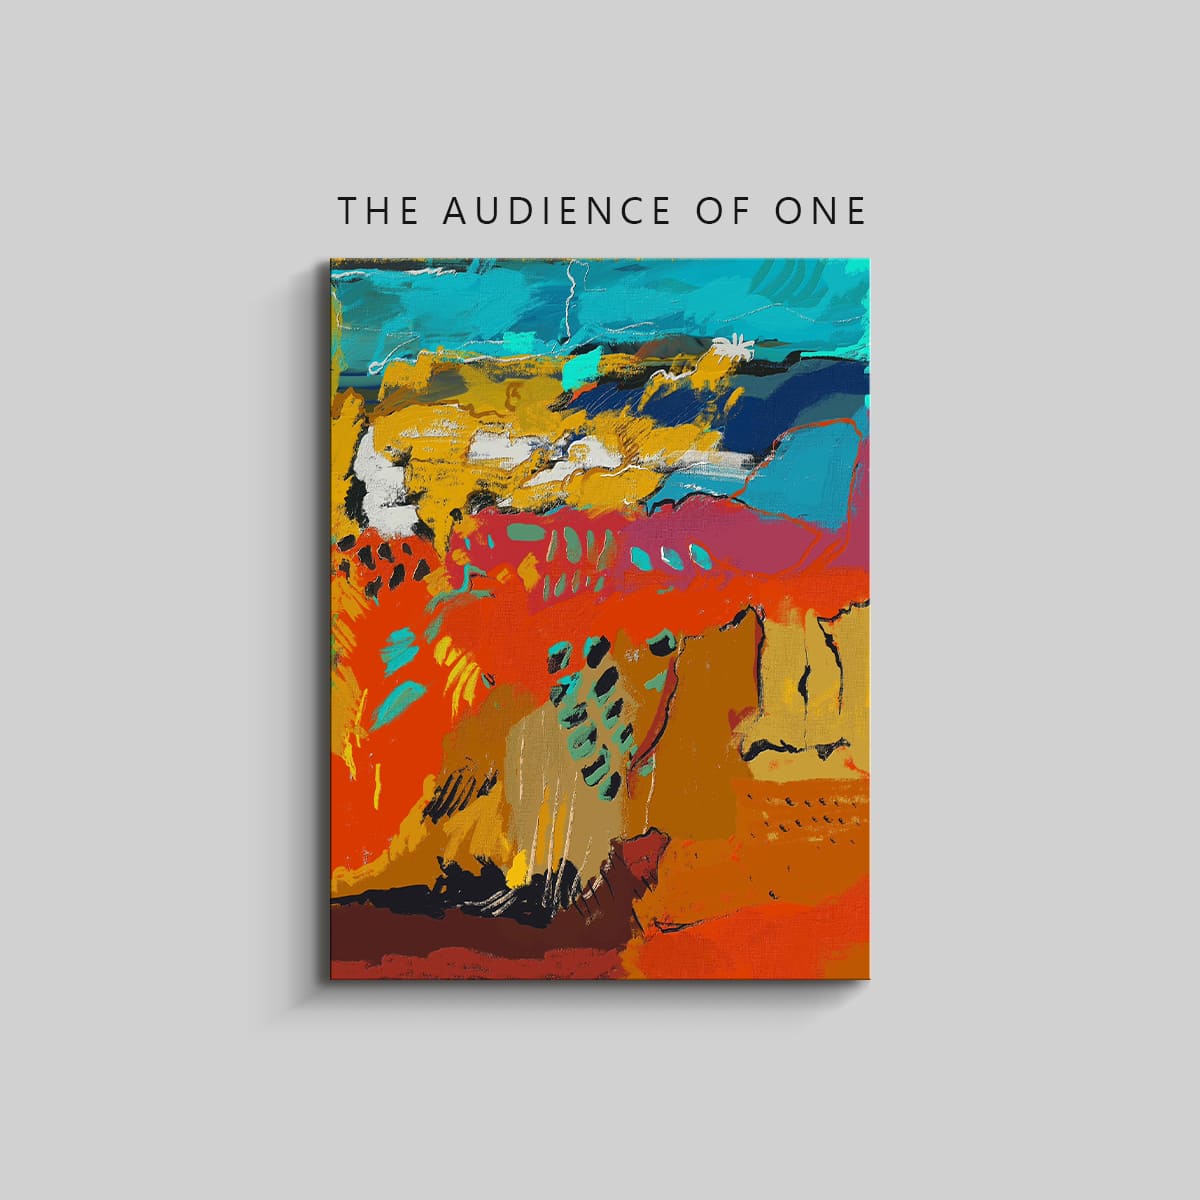 The Audience of One